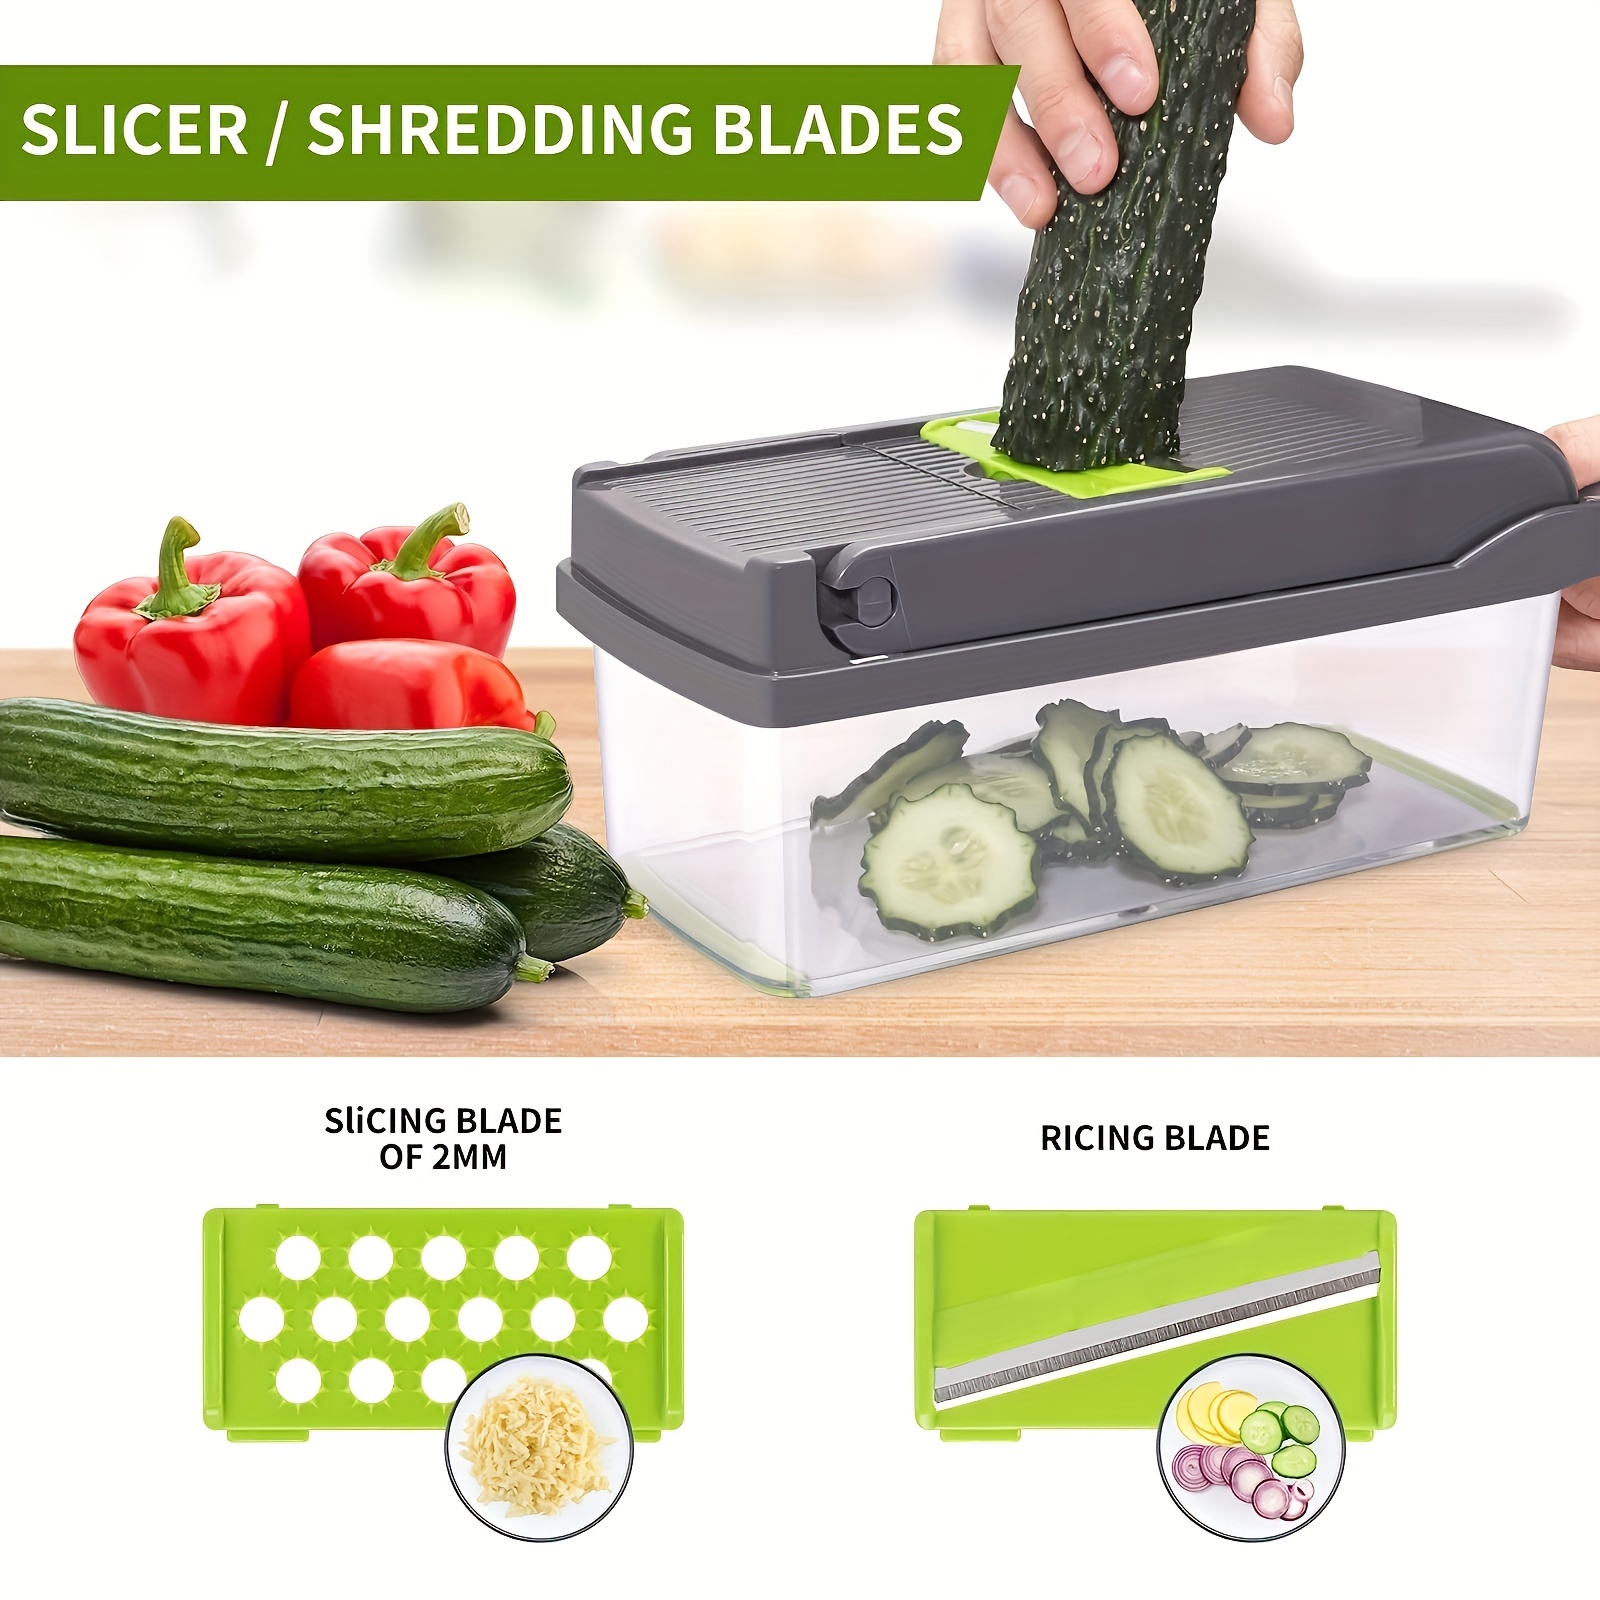 Vegetable Dicing Machine, China renowned Supplier of Vegetable Dicer Machine